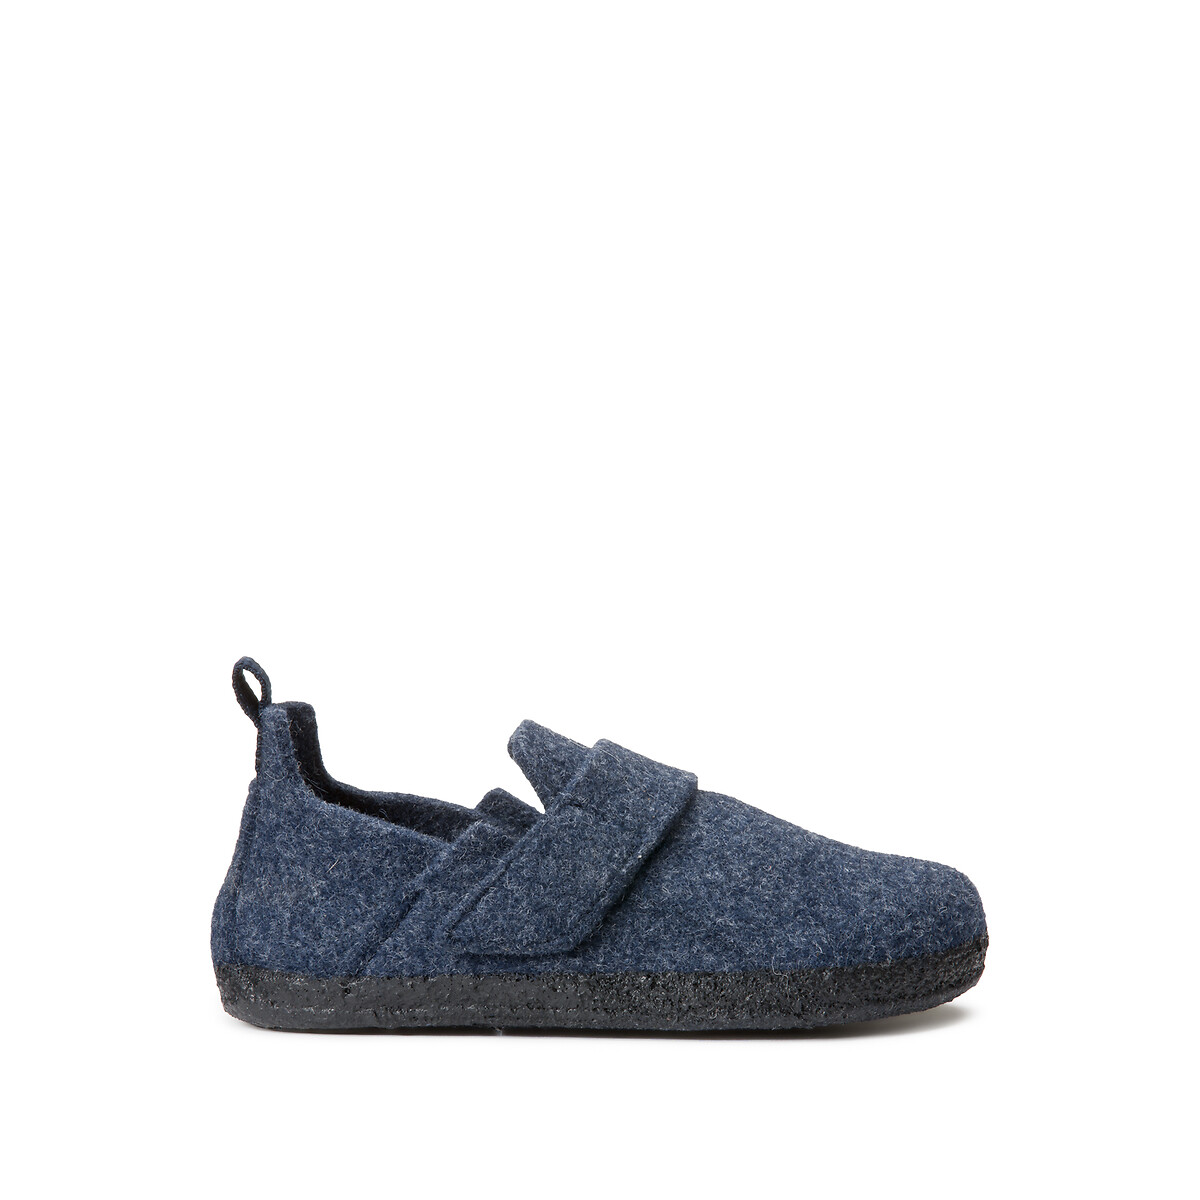 Kids Zermatt HL Slippers in Wool with Touch ’n’ Close Fastening, Made in Europe